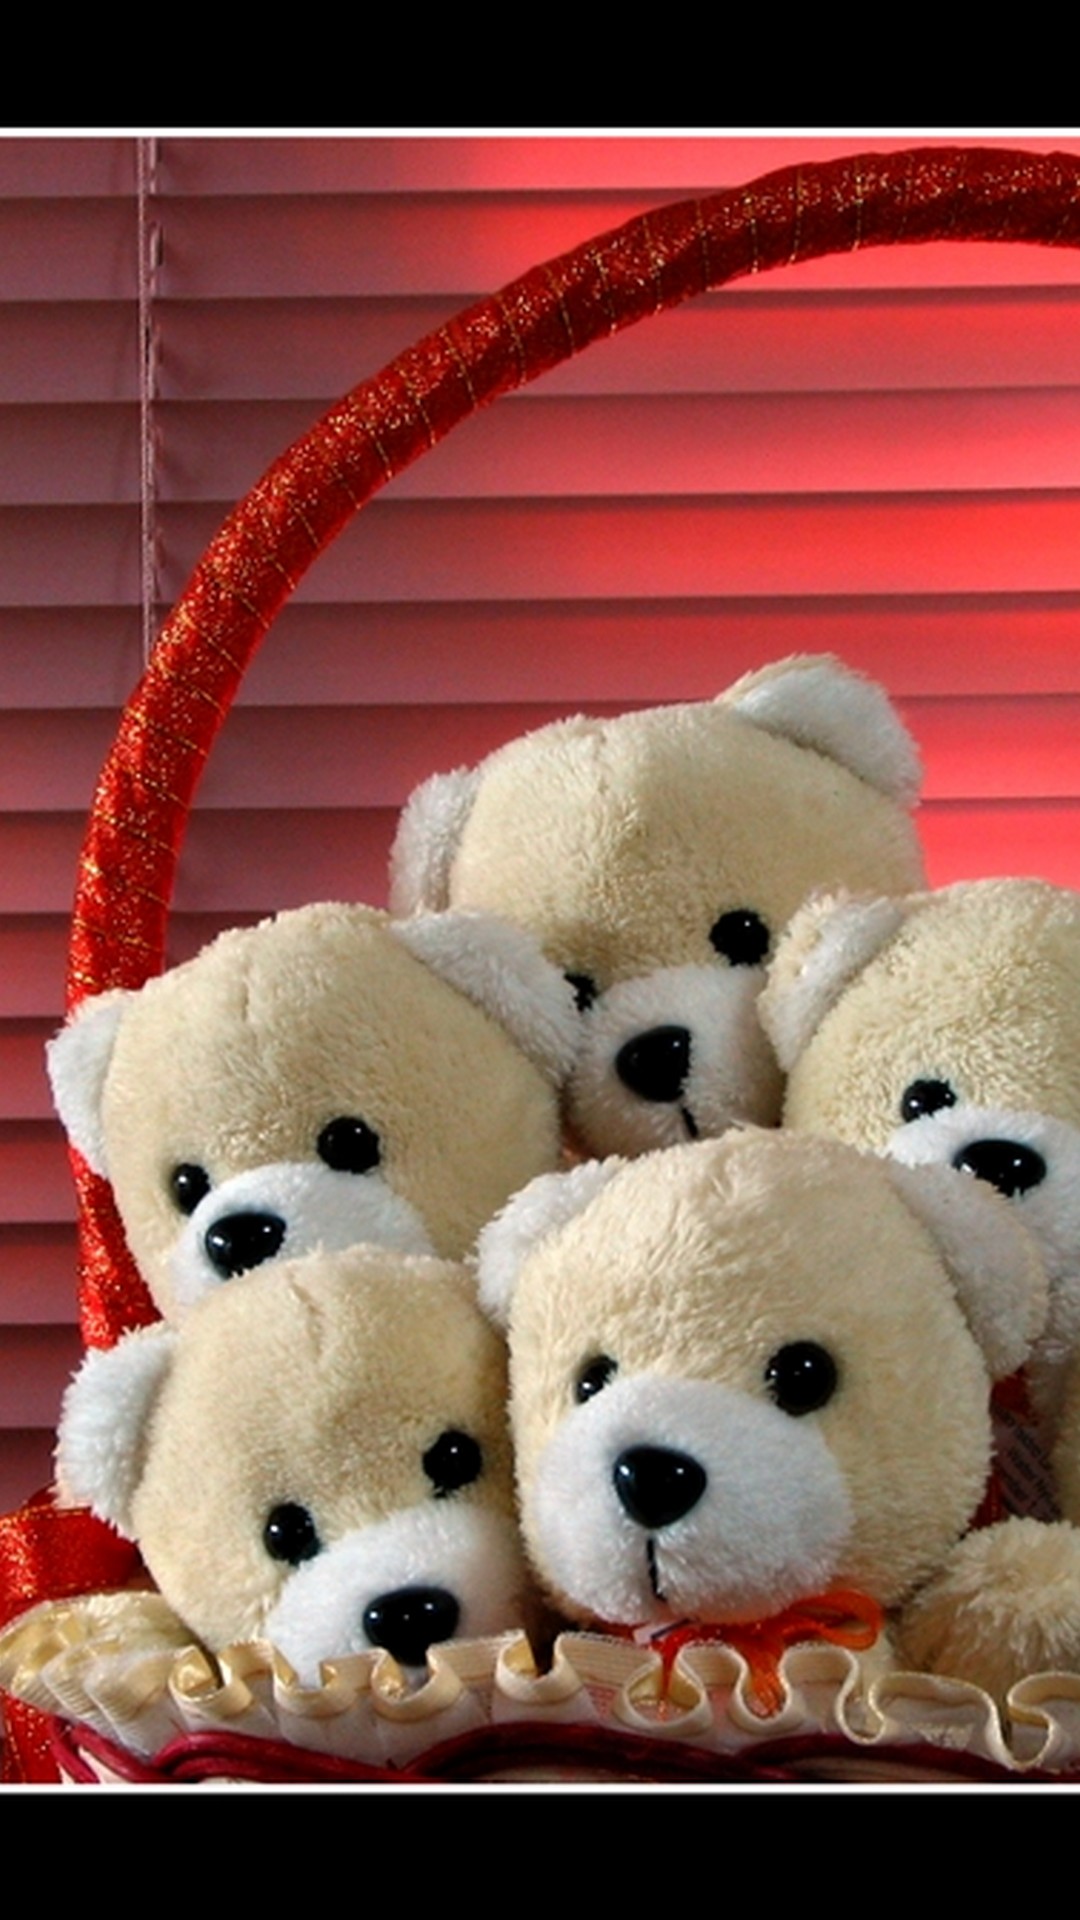 Iphone Wallpaper Cute Teddy Bear With Image Resolution - Cute Teddy Bear  Wallpaper Hd - 1080x1920 Wallpaper 